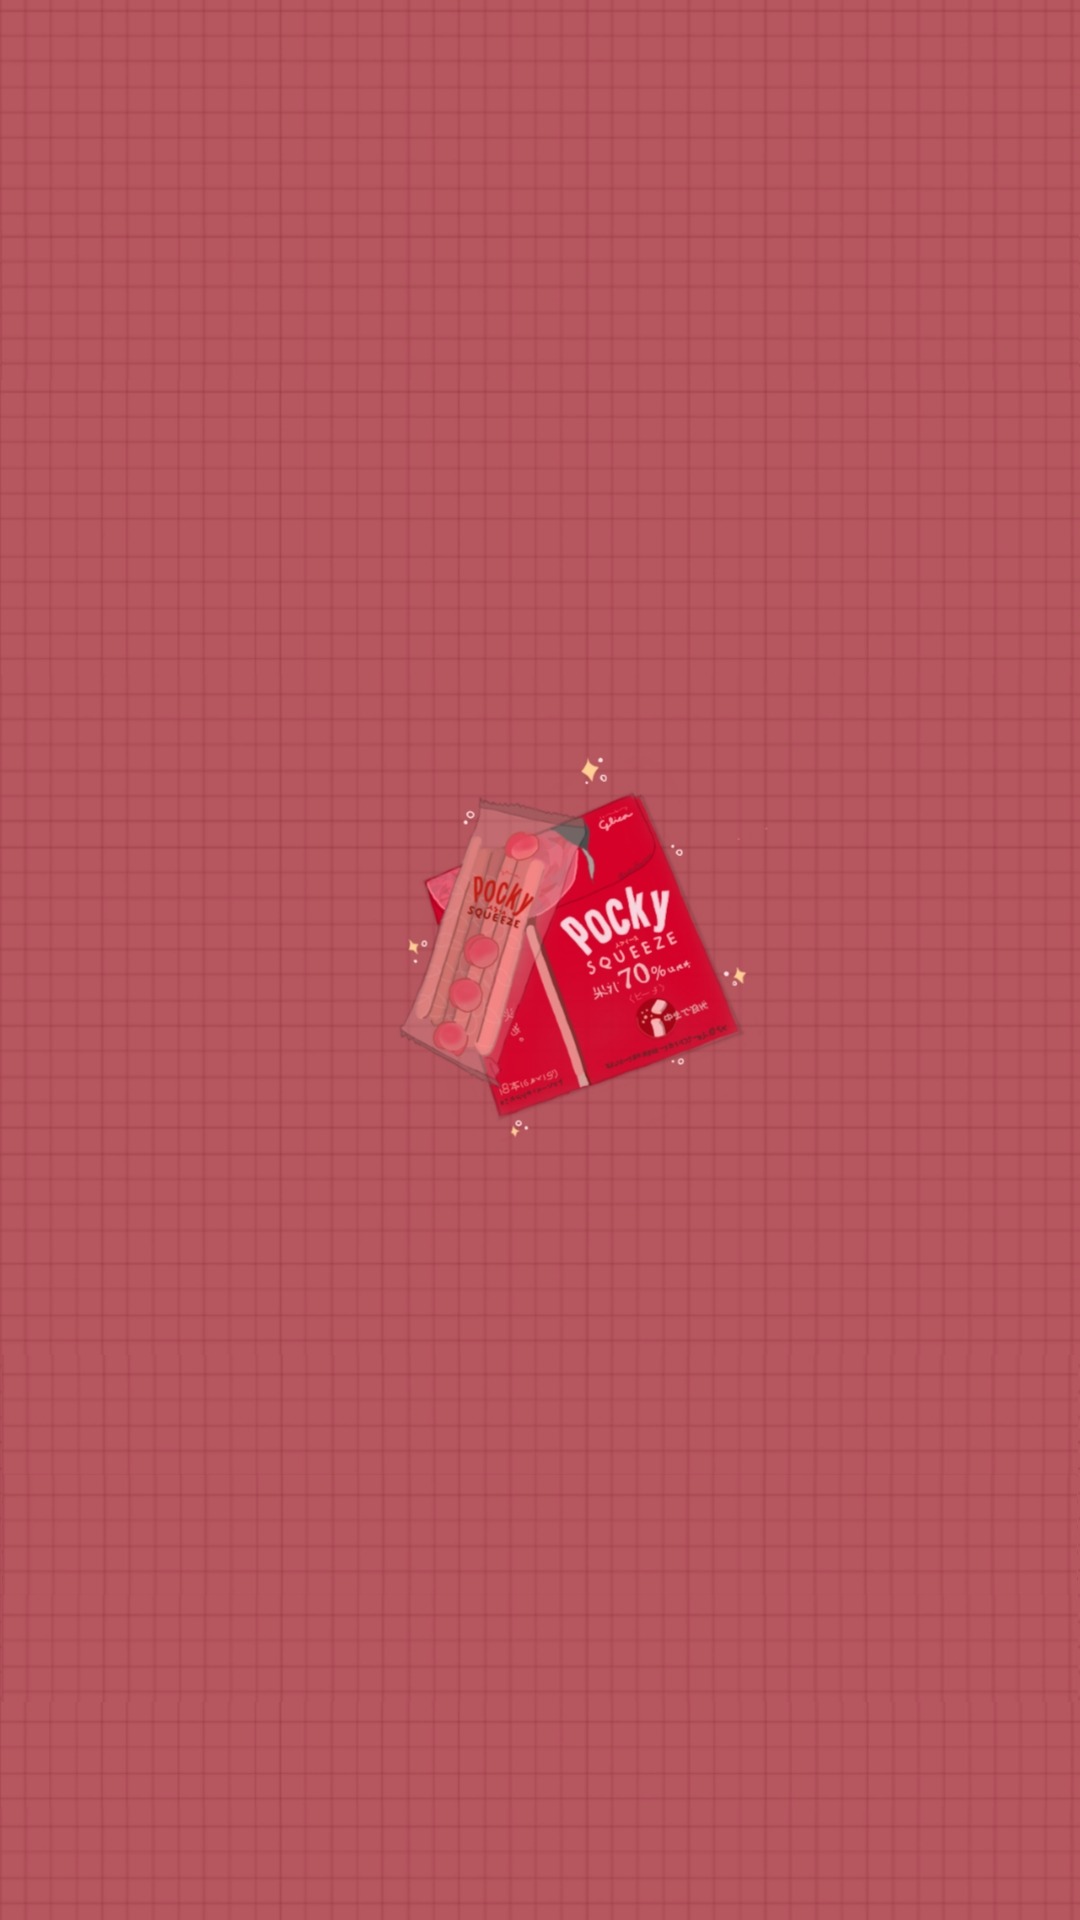 Pocky Wallpapers